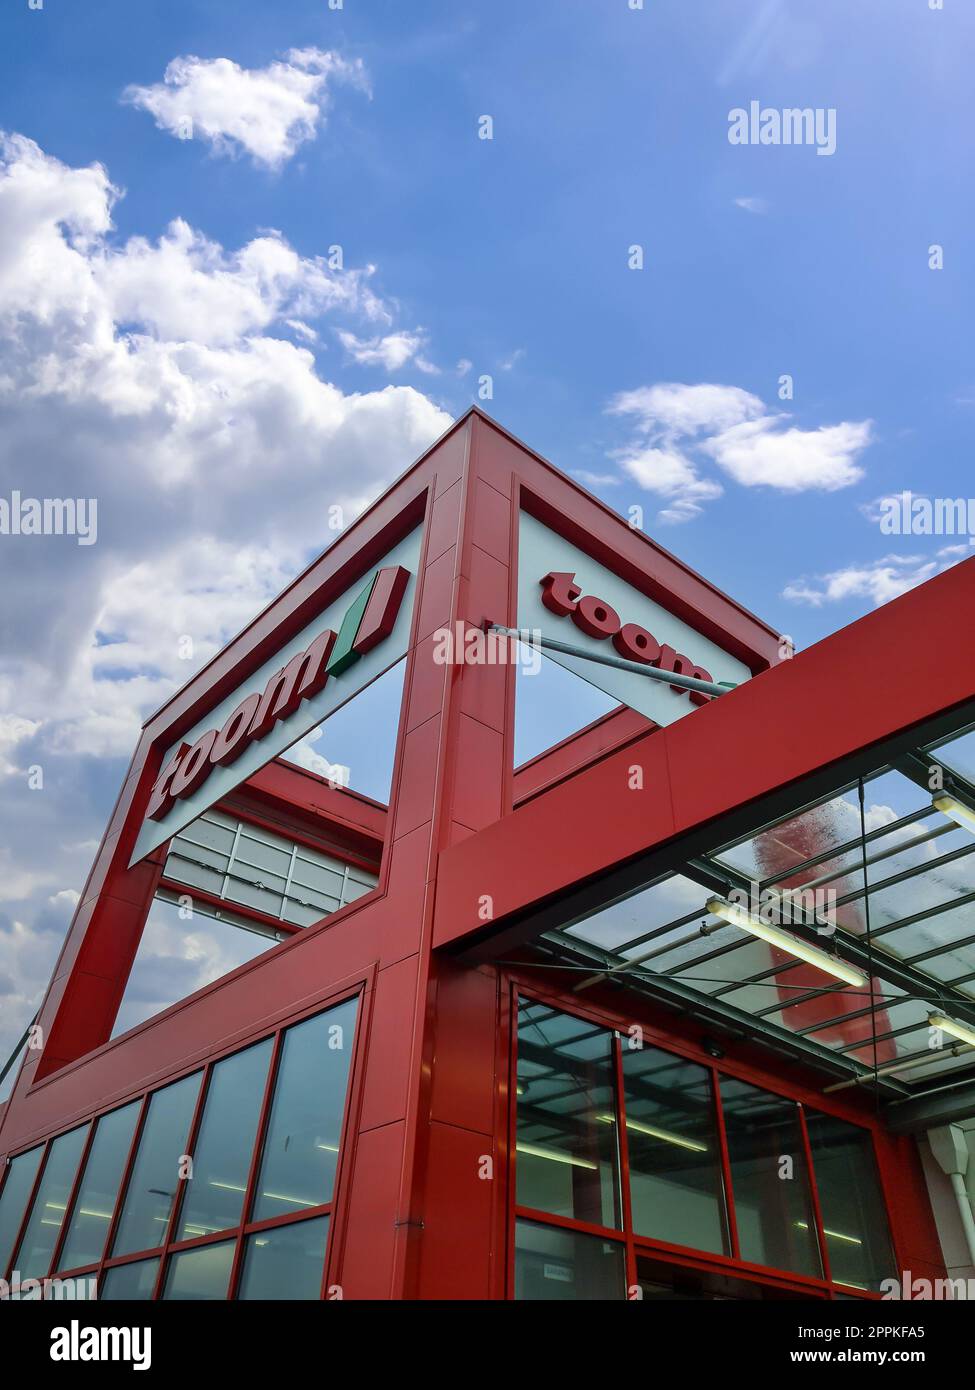 Kiel, Germany - 11 February 2023: Entrance area of the Toom brand furniture store in good weather Stock Photo